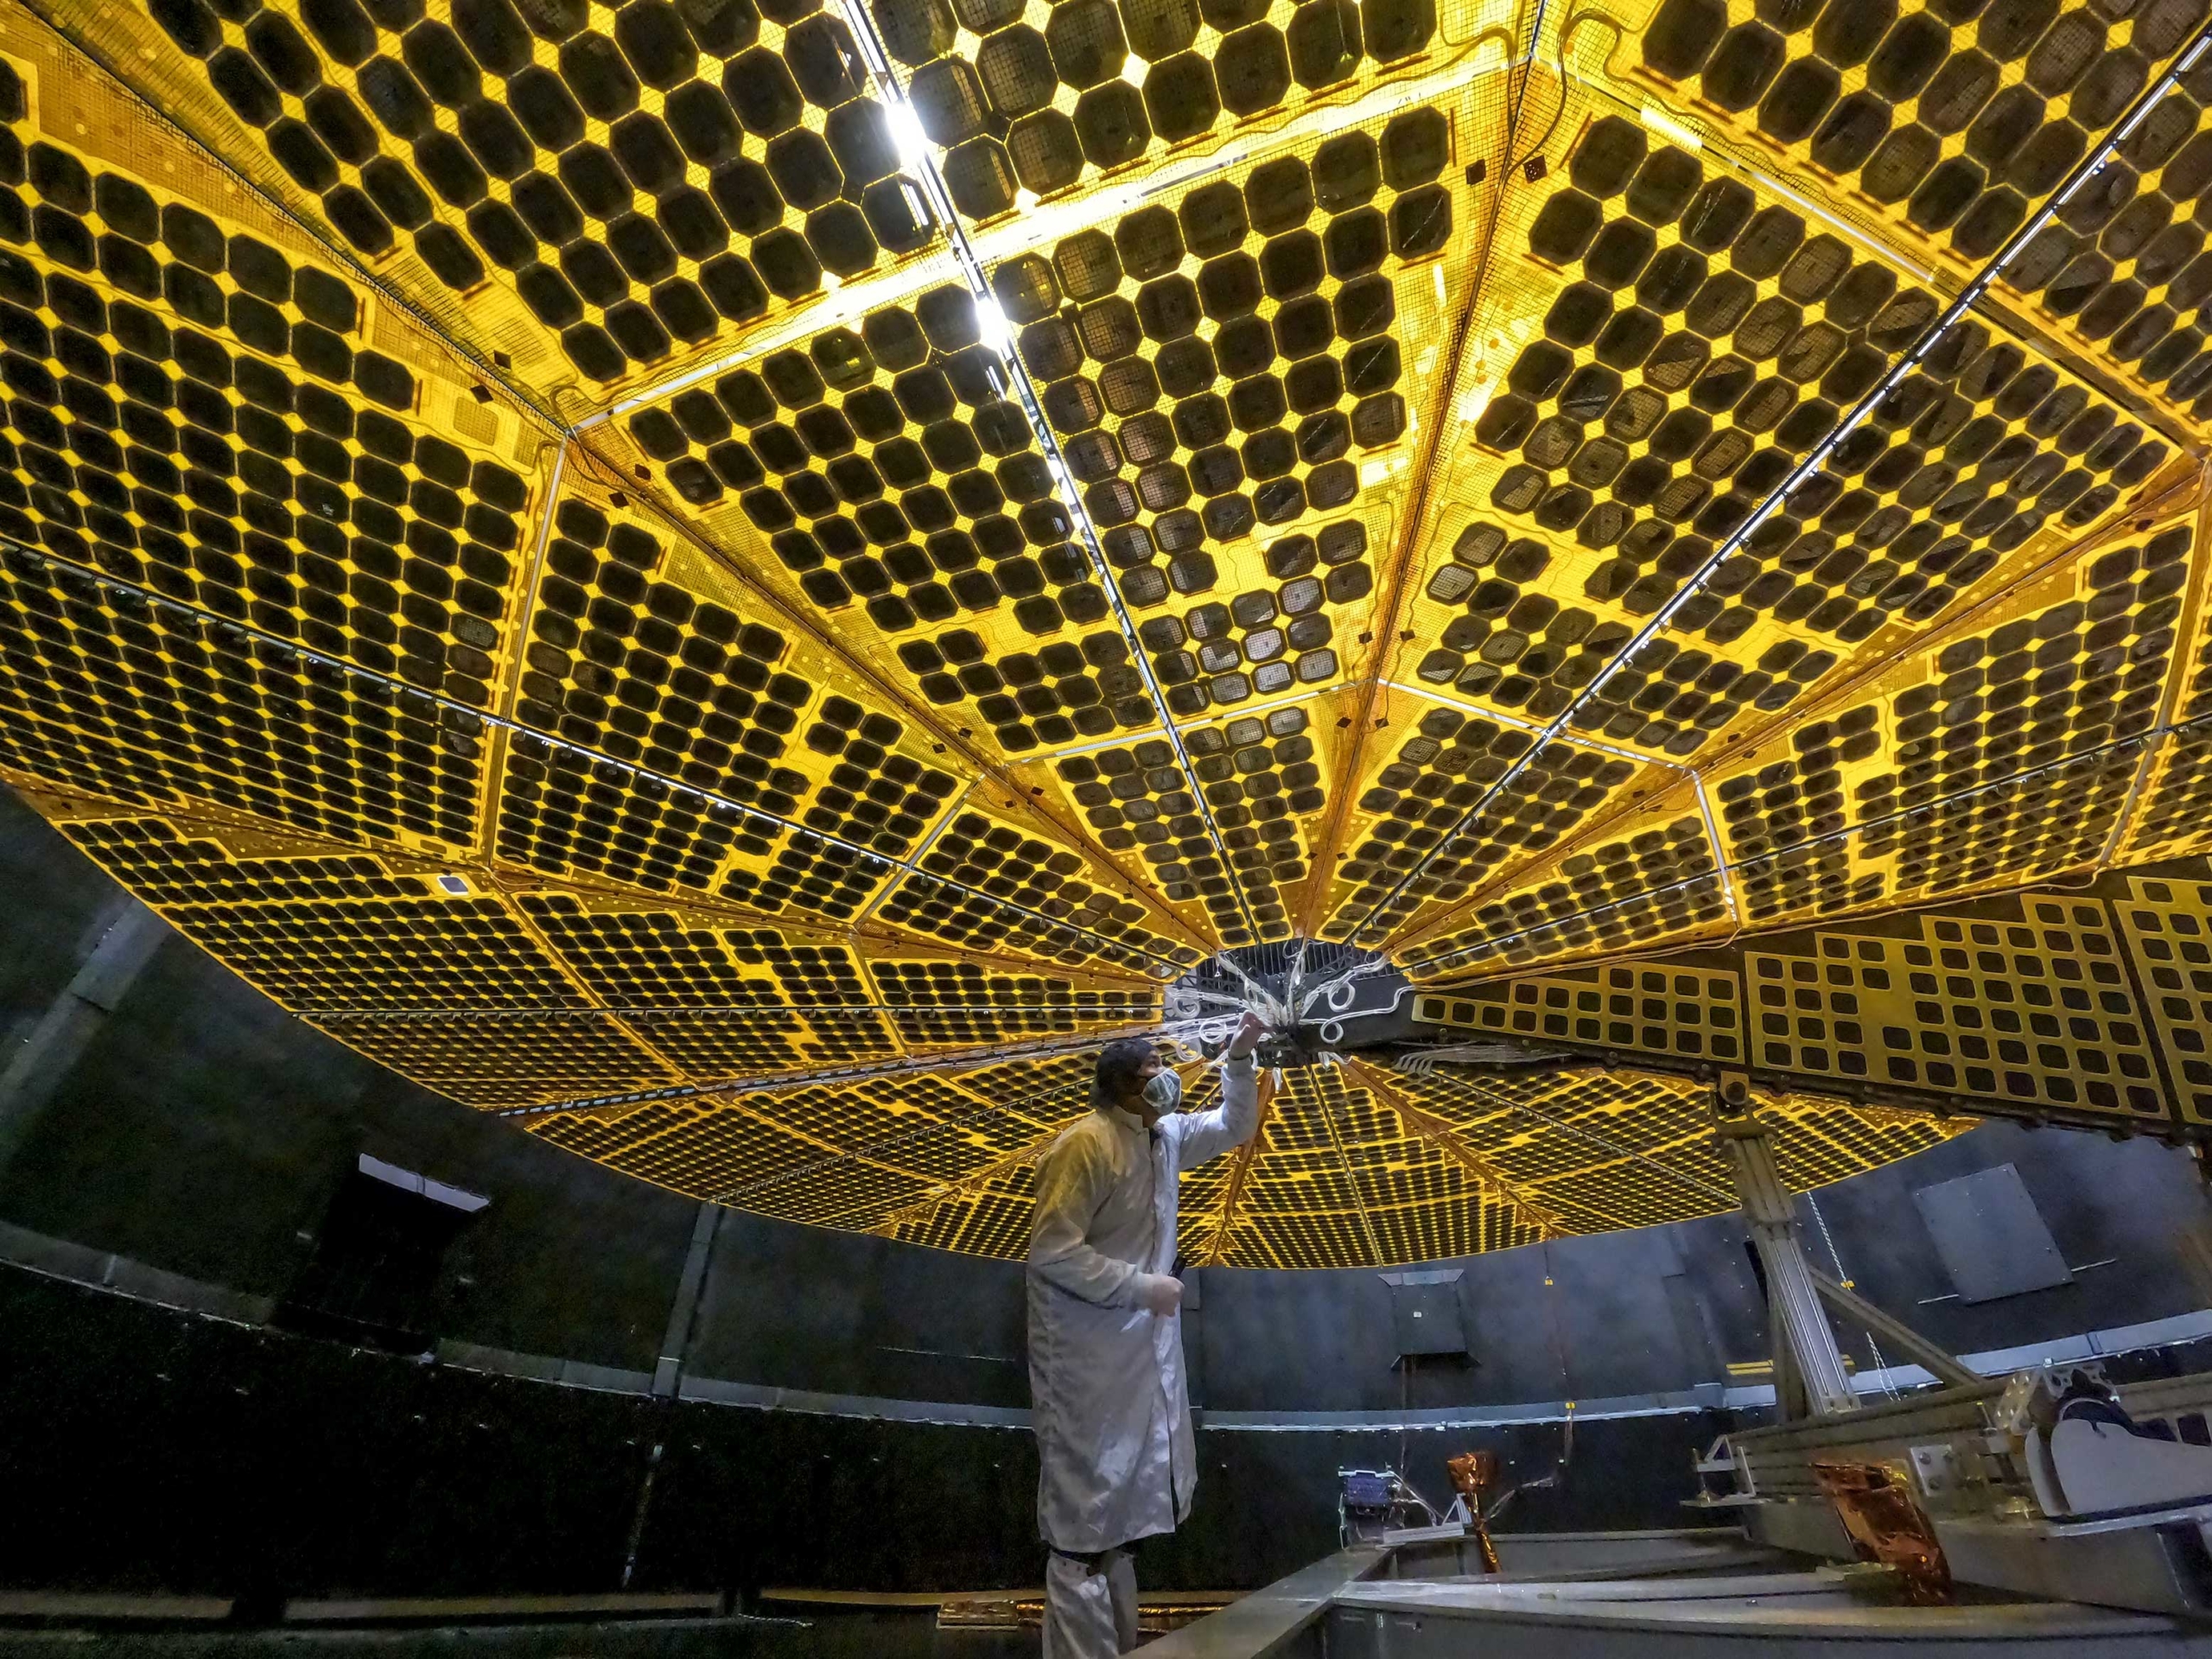 How engineers fixed Lucy spacecraft’s solar array issue as
it whizzed through space